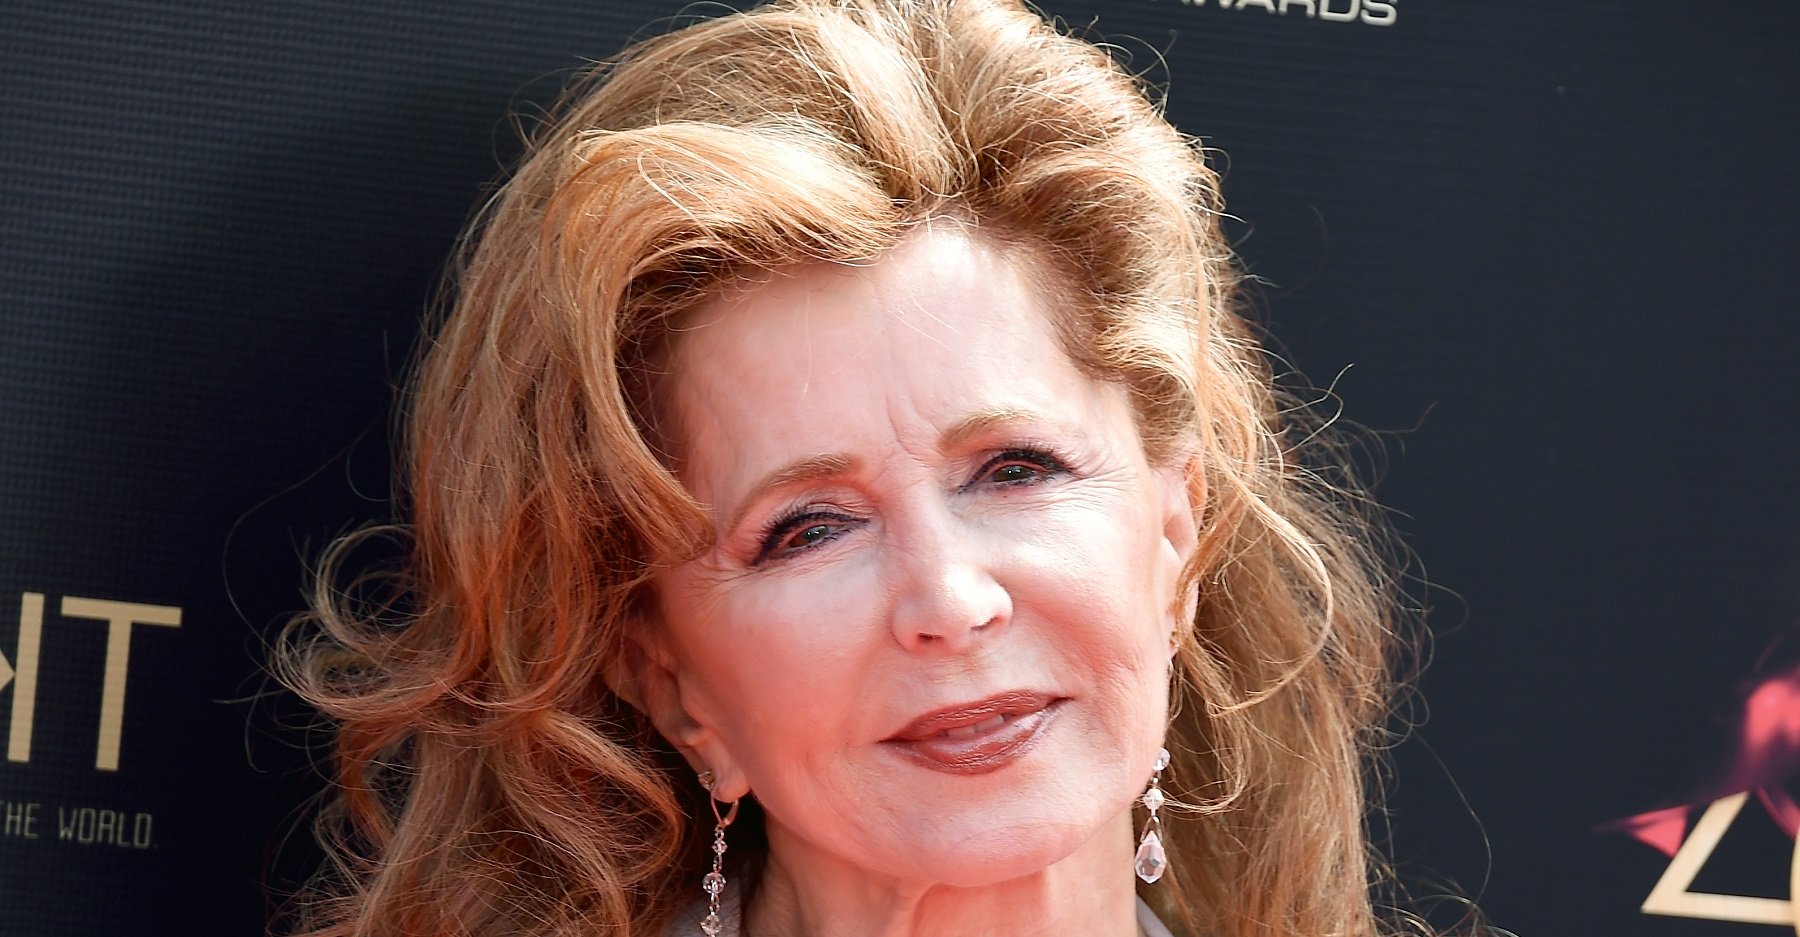 Days of Our Lives comings and goings focus on Suzanne Rogers, whose headshot is pictured here